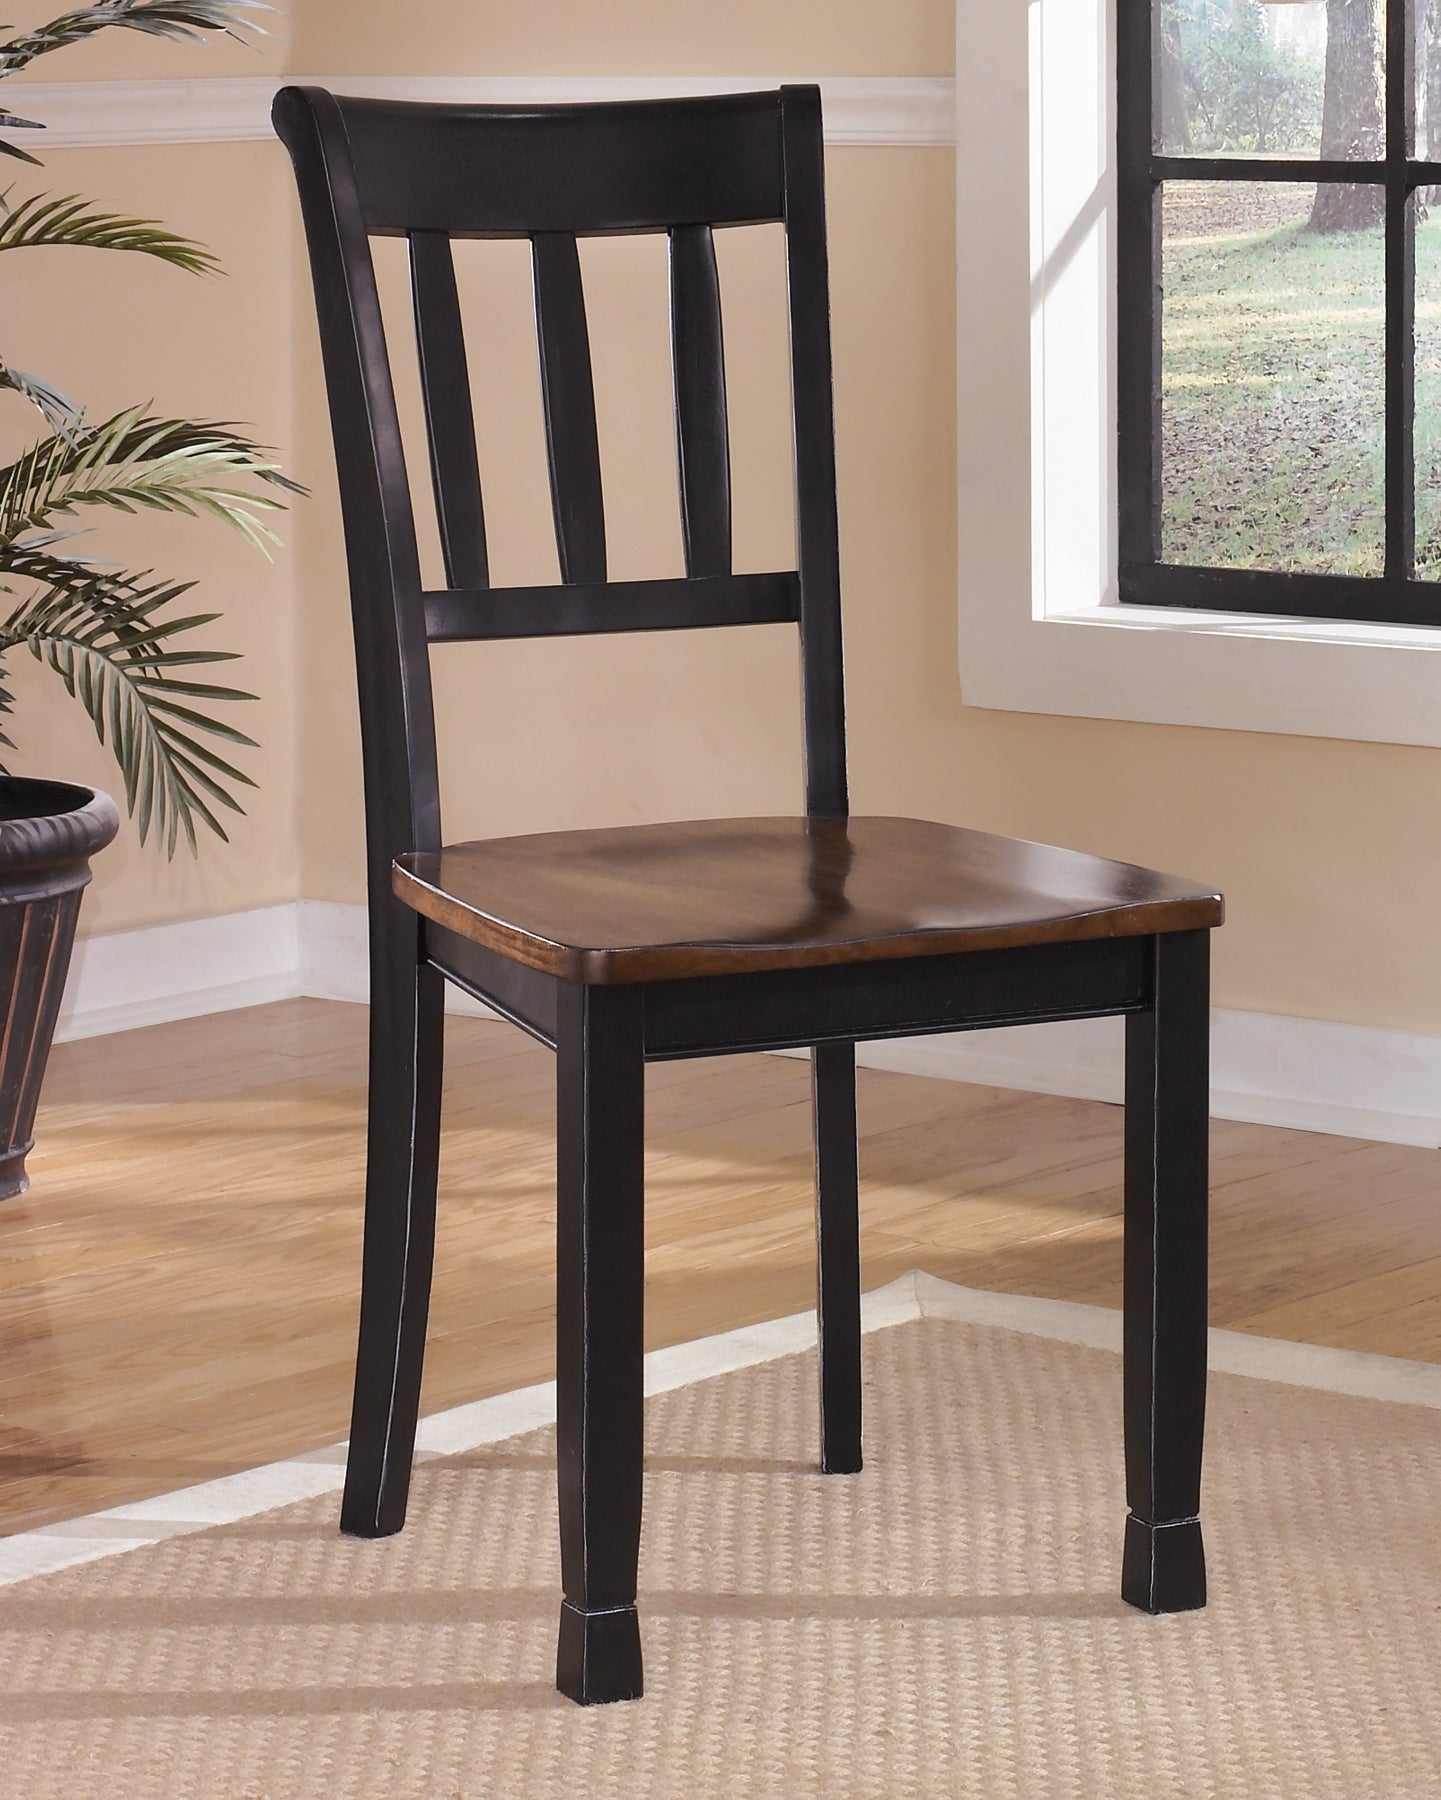 Ashley Express - Owingsville Dining Table and 4 Chairs